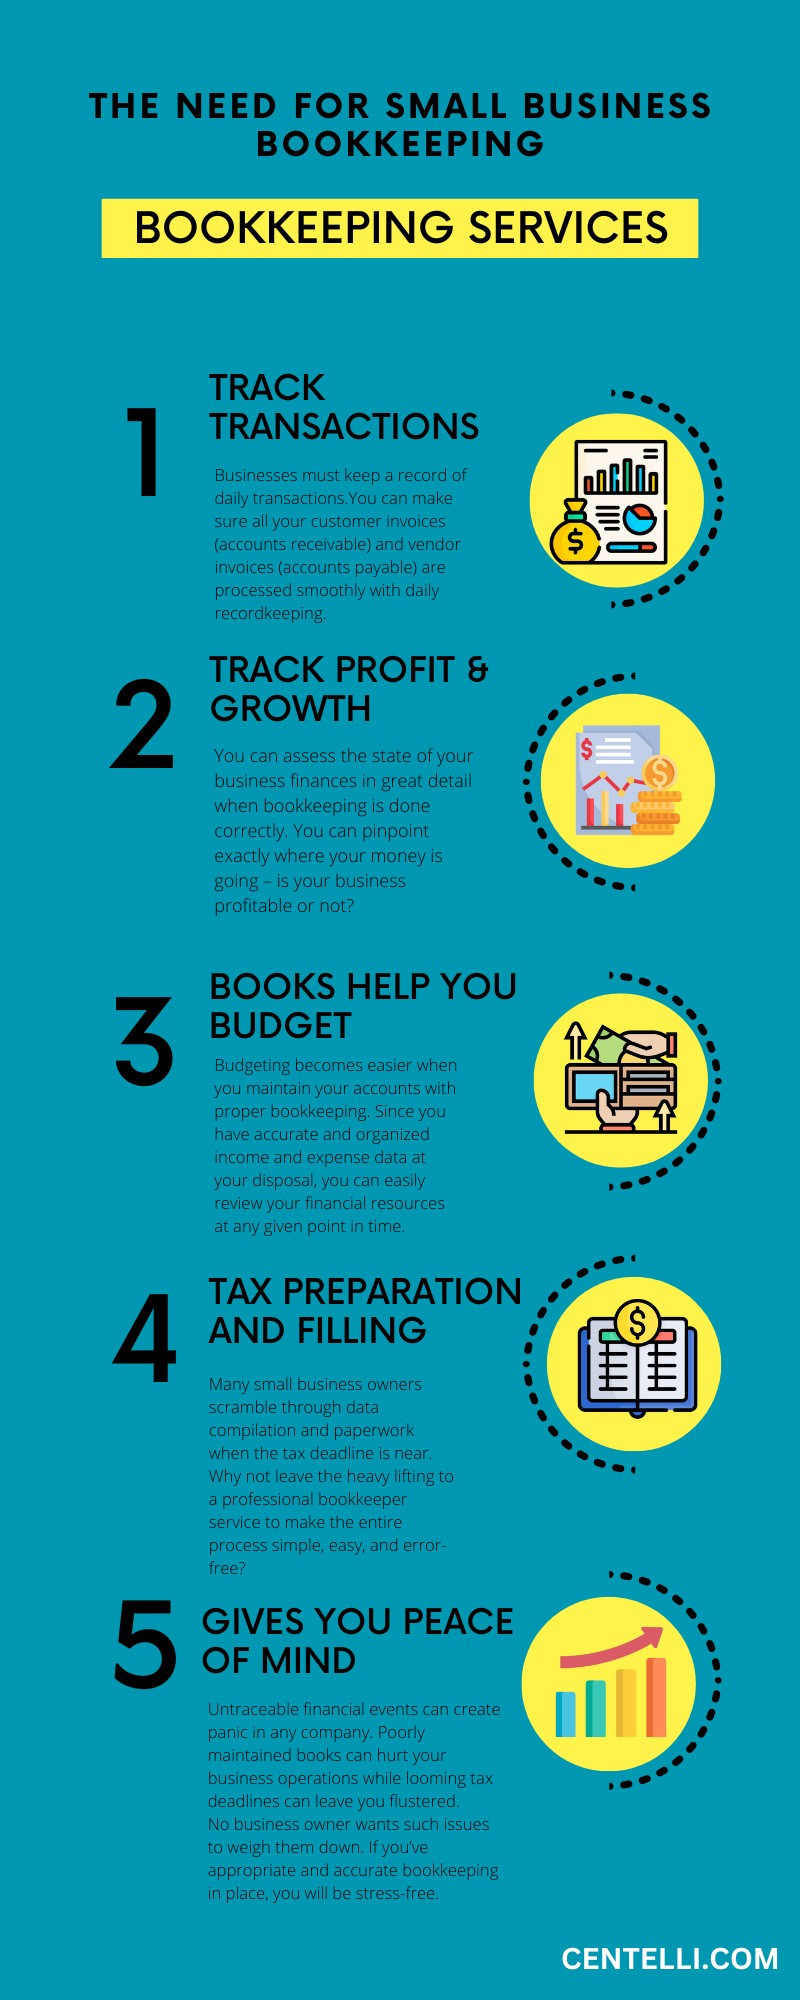 The Need For Small Business Bookkeeping